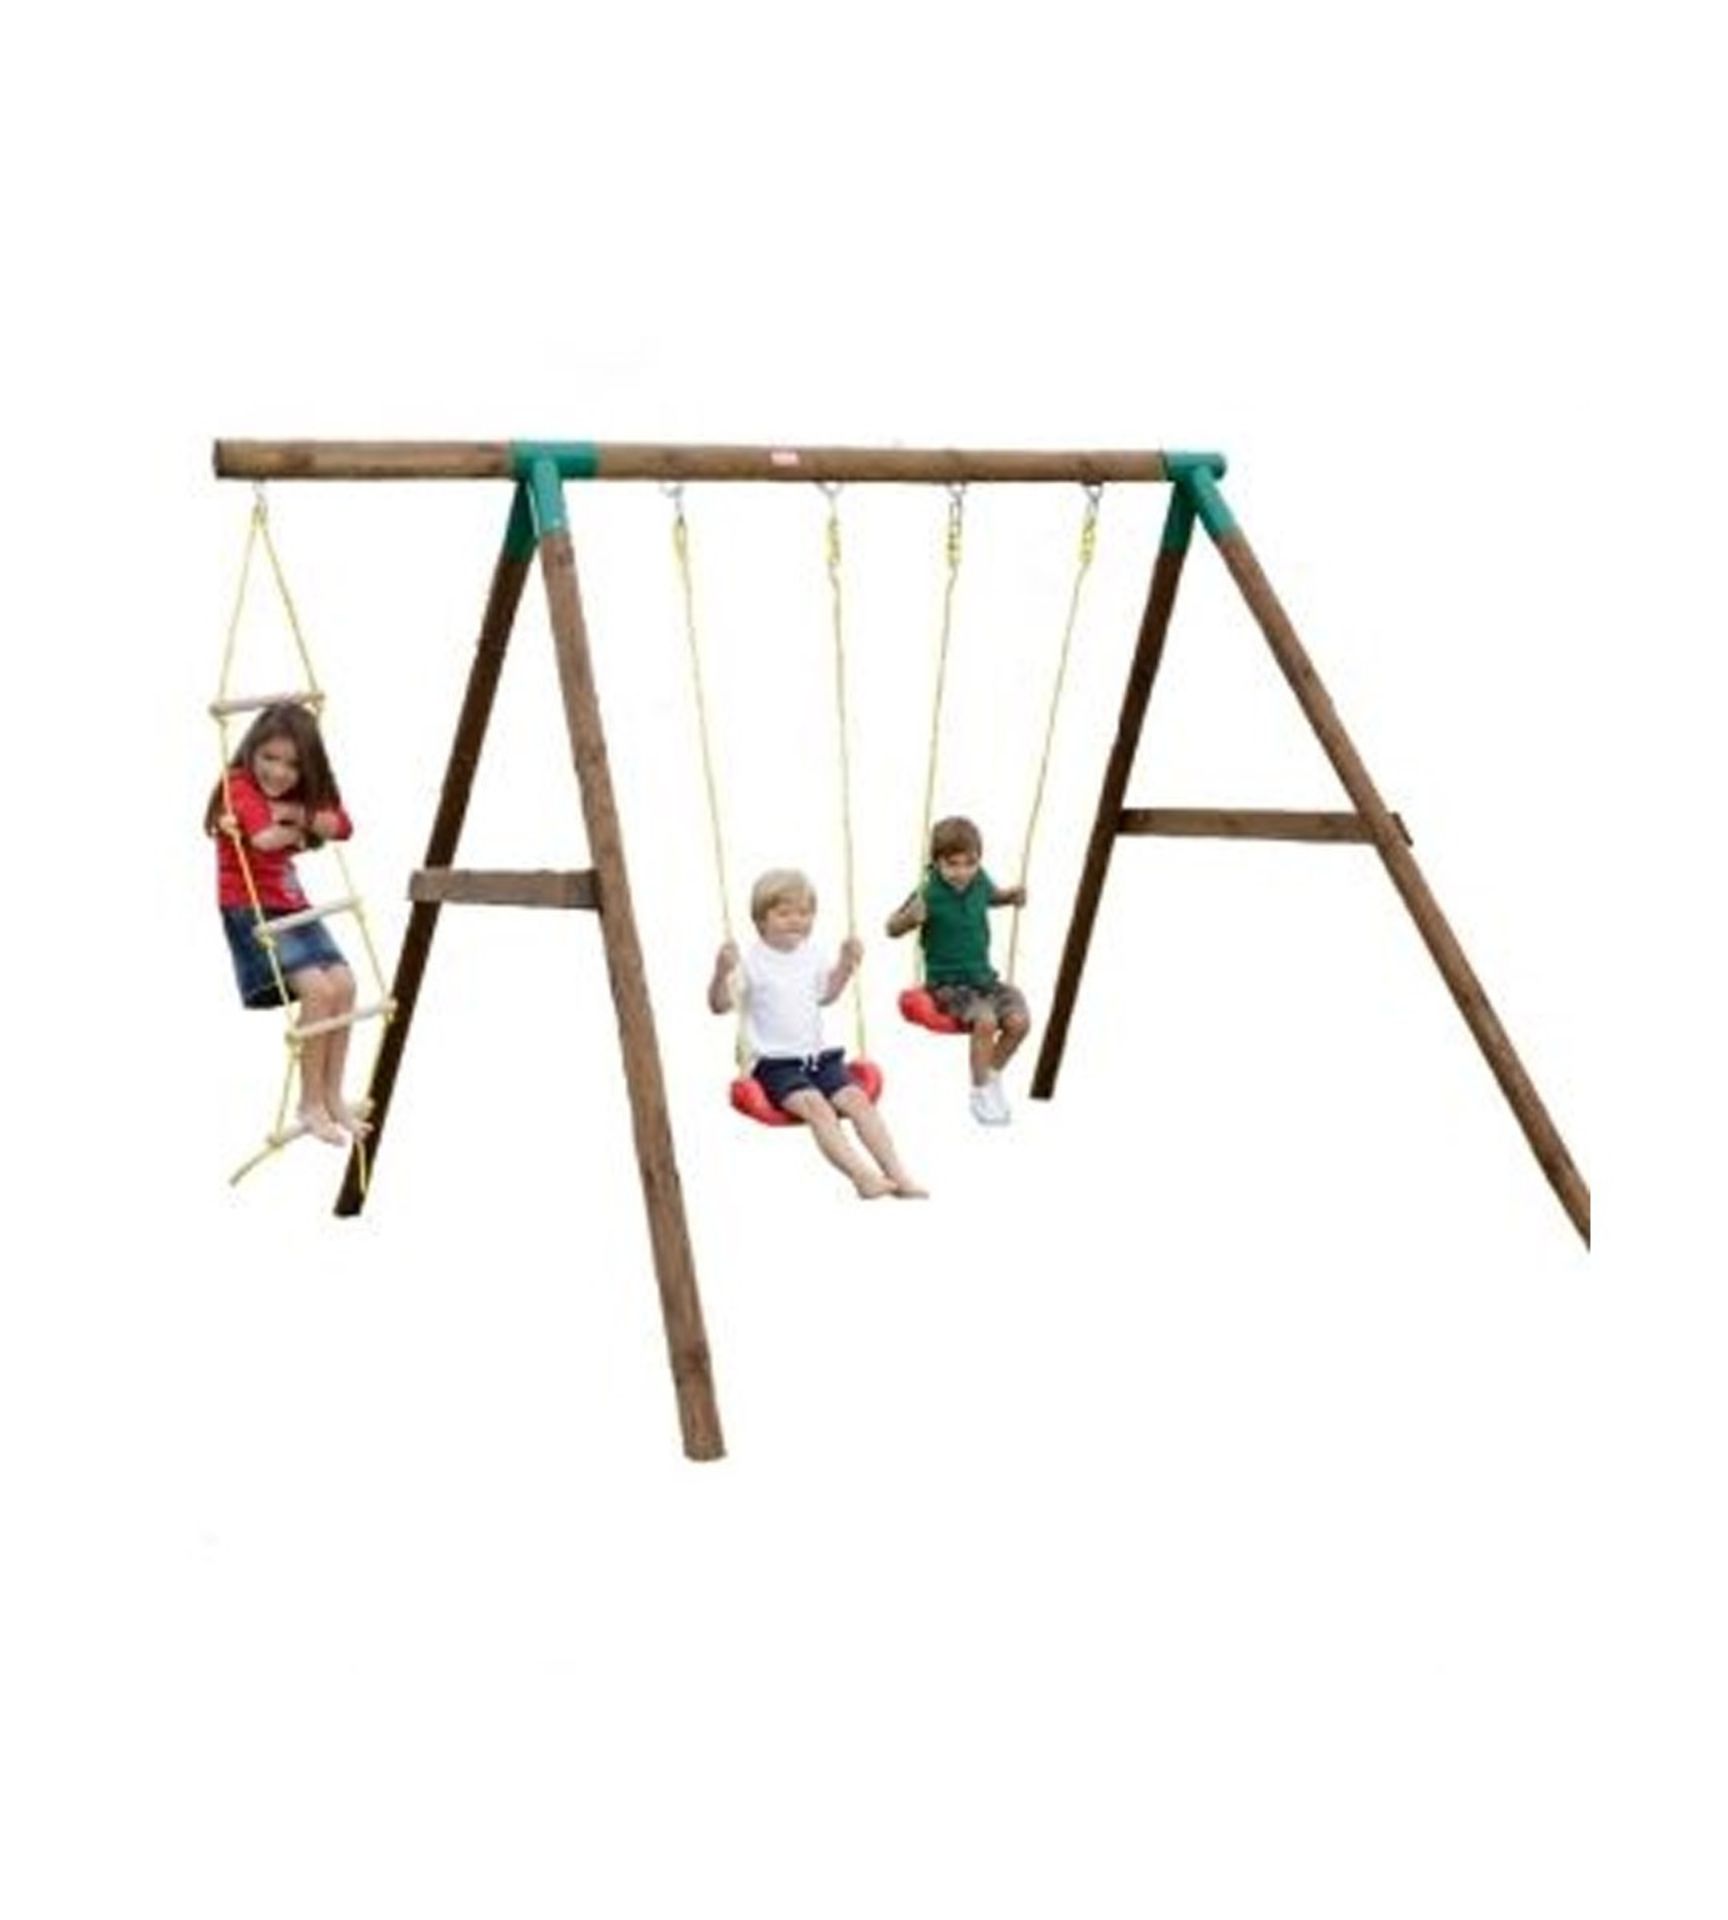 PALLET LOT 12 x Riga Swing Set with Ladder. RRP £319.99 EACH. This wooden play system will provide - Image 2 of 2